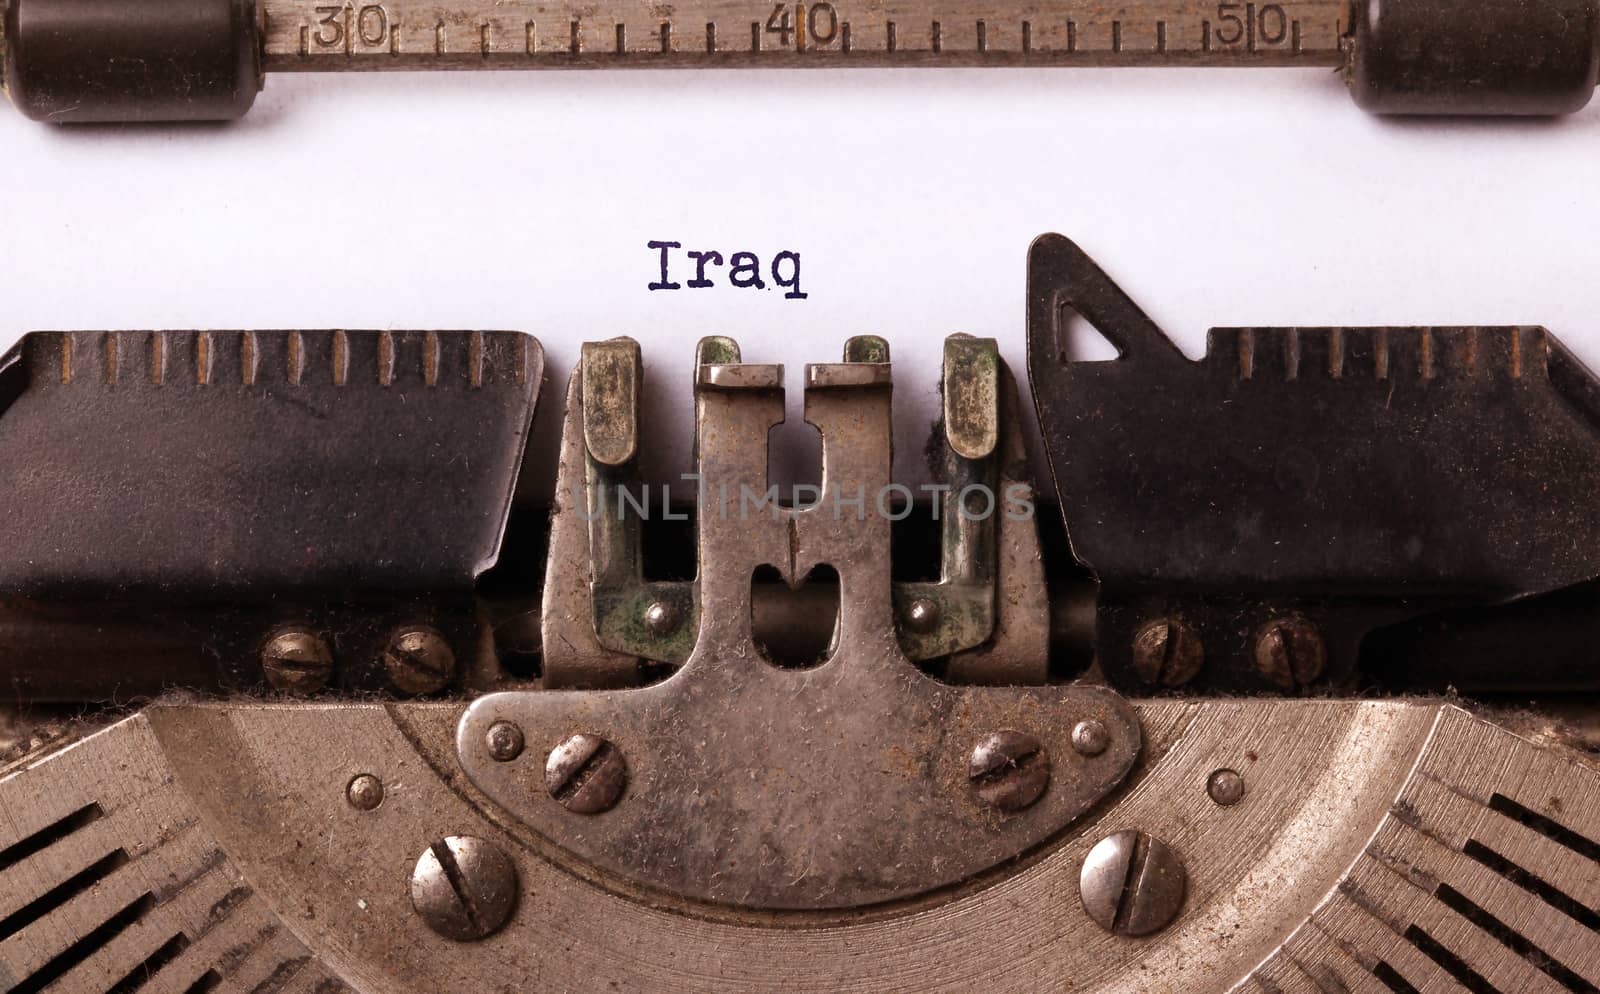 Inscription made by vinrage typewriter, country, Iraq